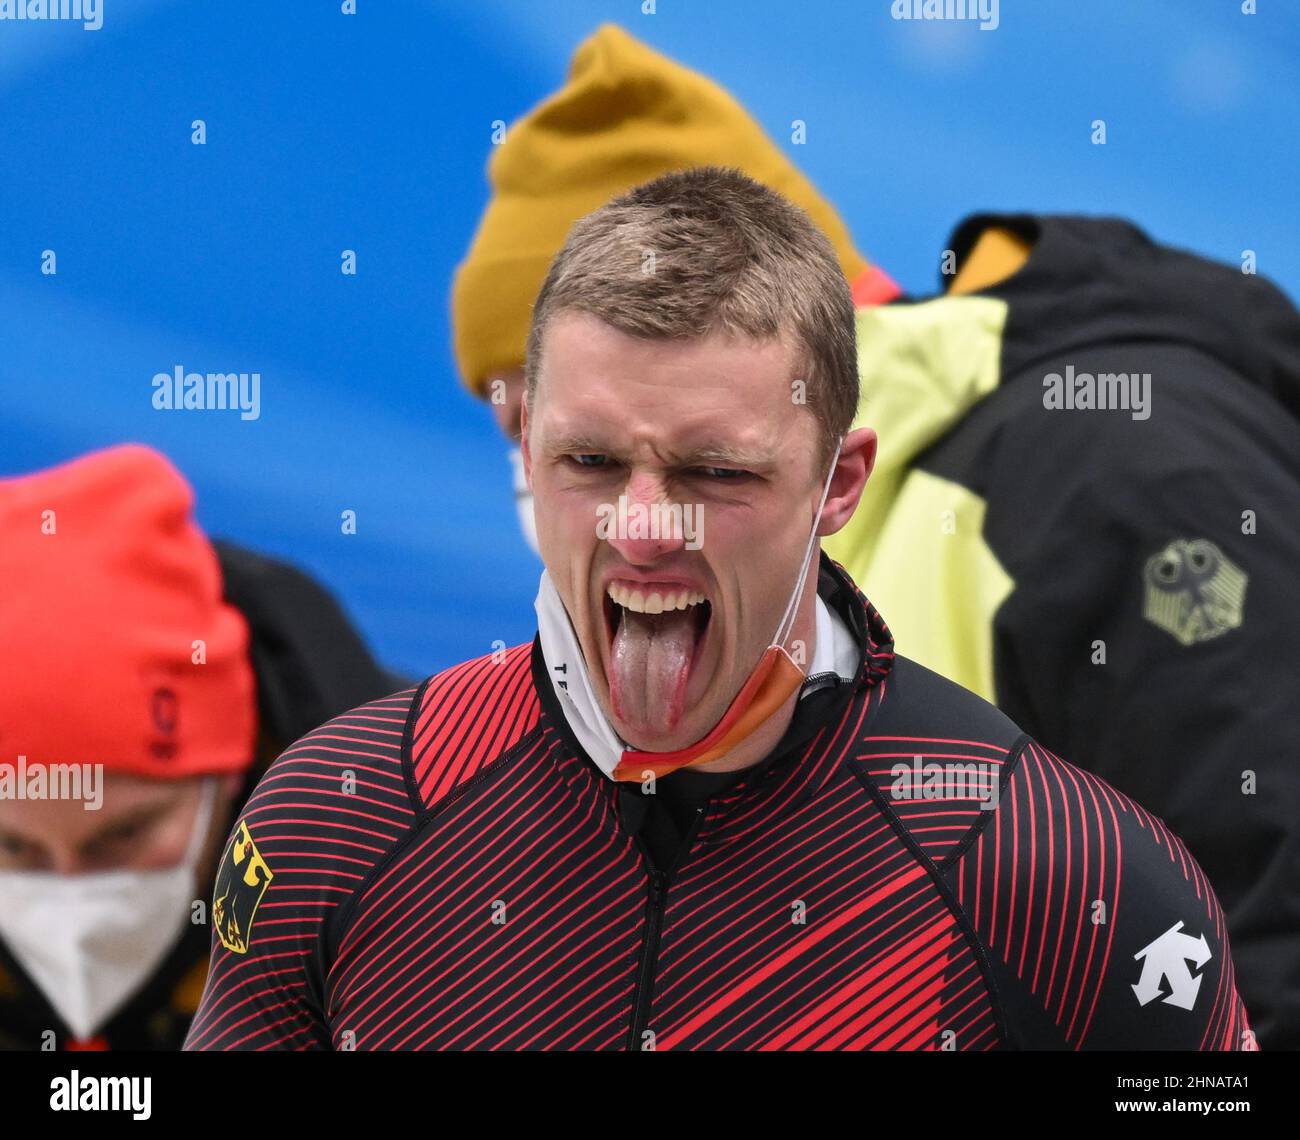 Beijing, China. 15th Feb, 2022. Thorsten Margis of Germany reacts after the bobsleigh 2-man heat of Beijing 2022 Winter Olympics at National Sliding Centre in Yanqing District, Beijing, capital of China, Feb. 15, 2022. Credit: Sun Fei/Xinhua/Alamy Live News Stock Photo